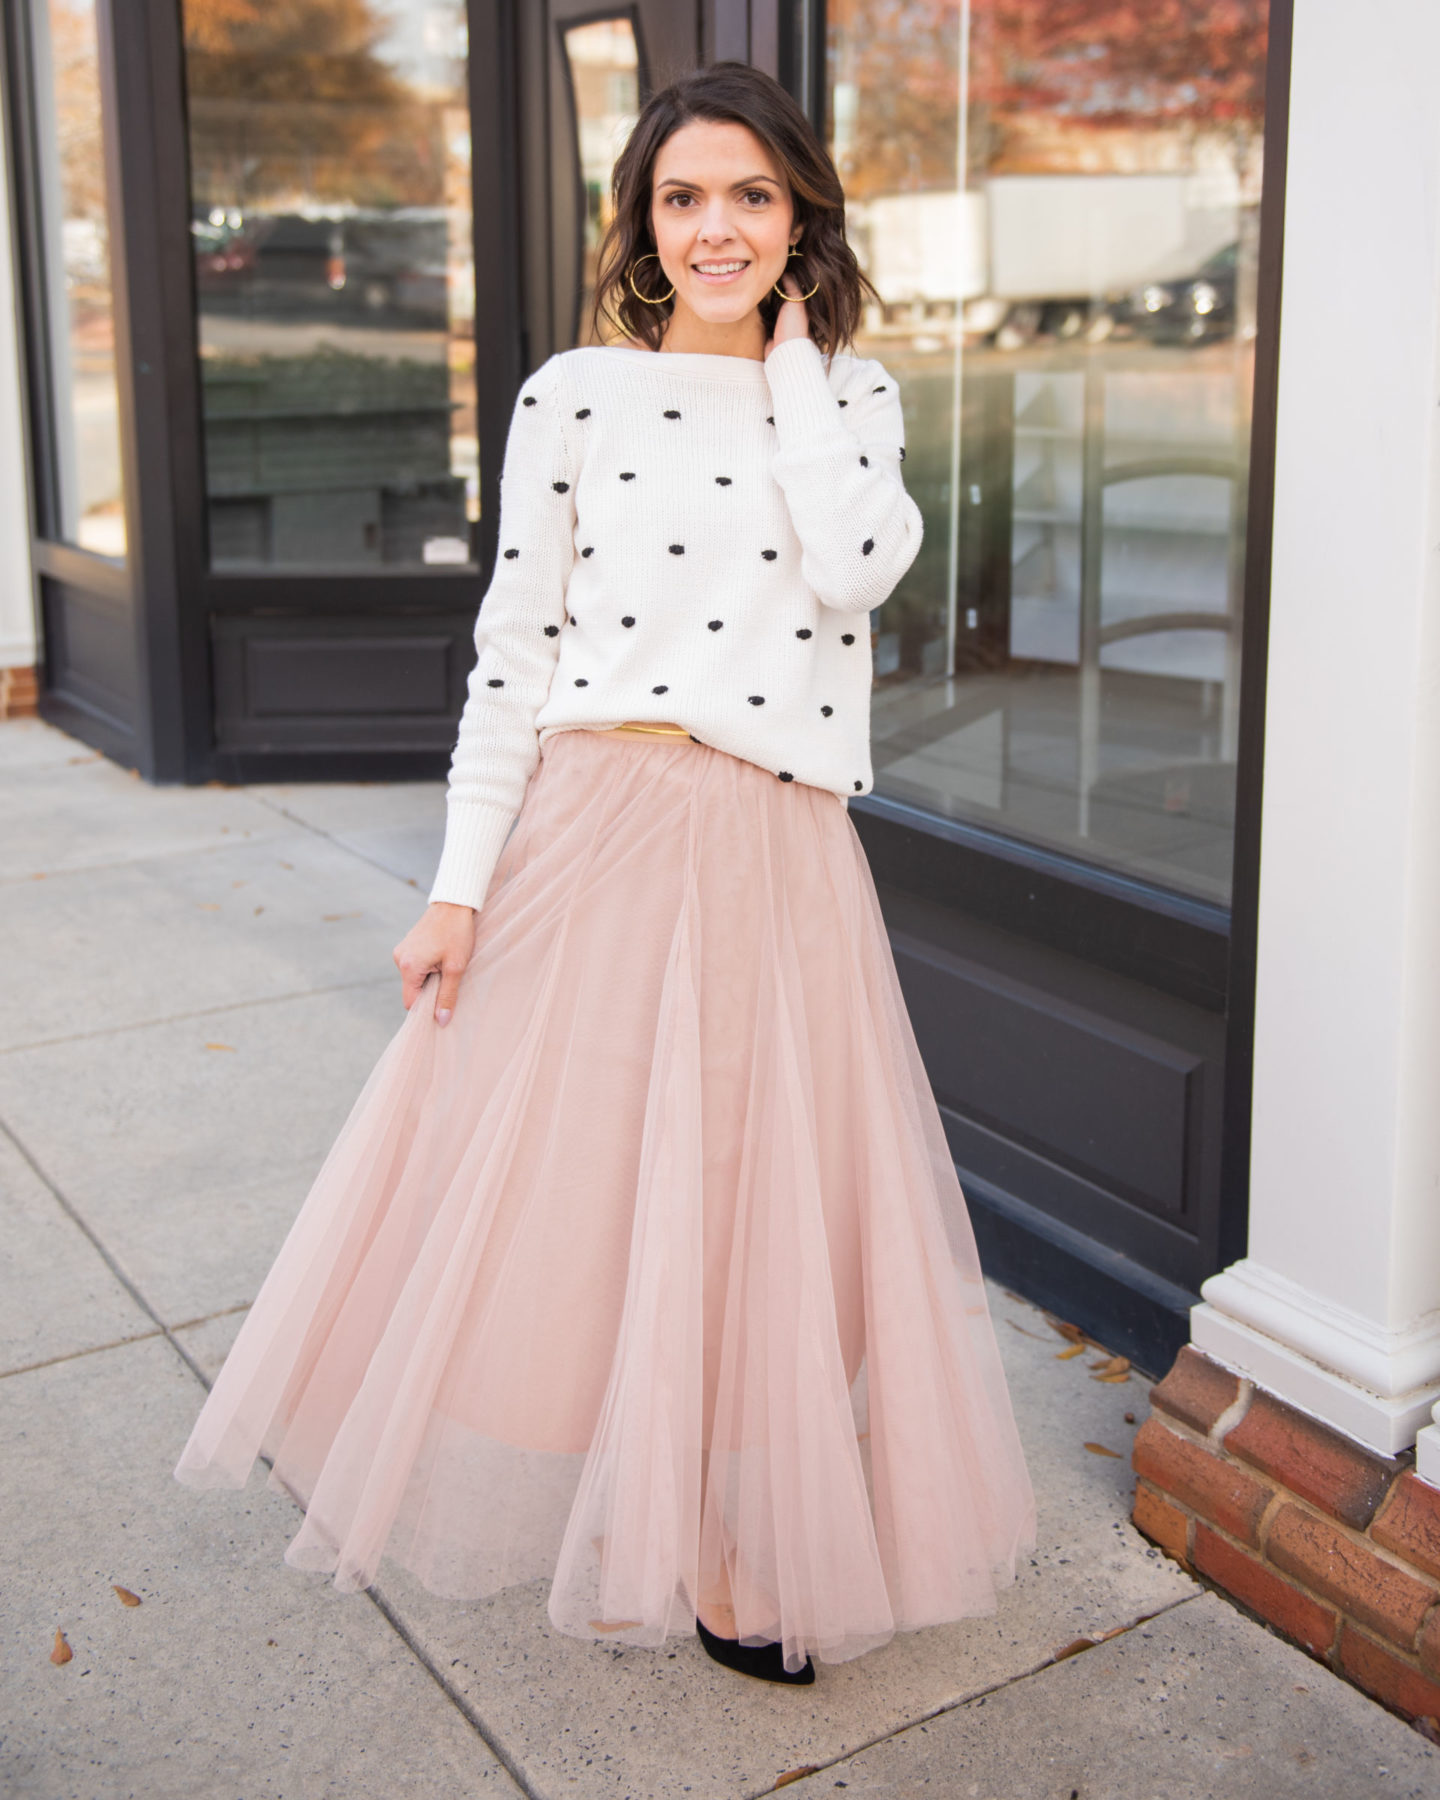 3 Ways To Style A Tulle Skirt The Sarah Stories 4960